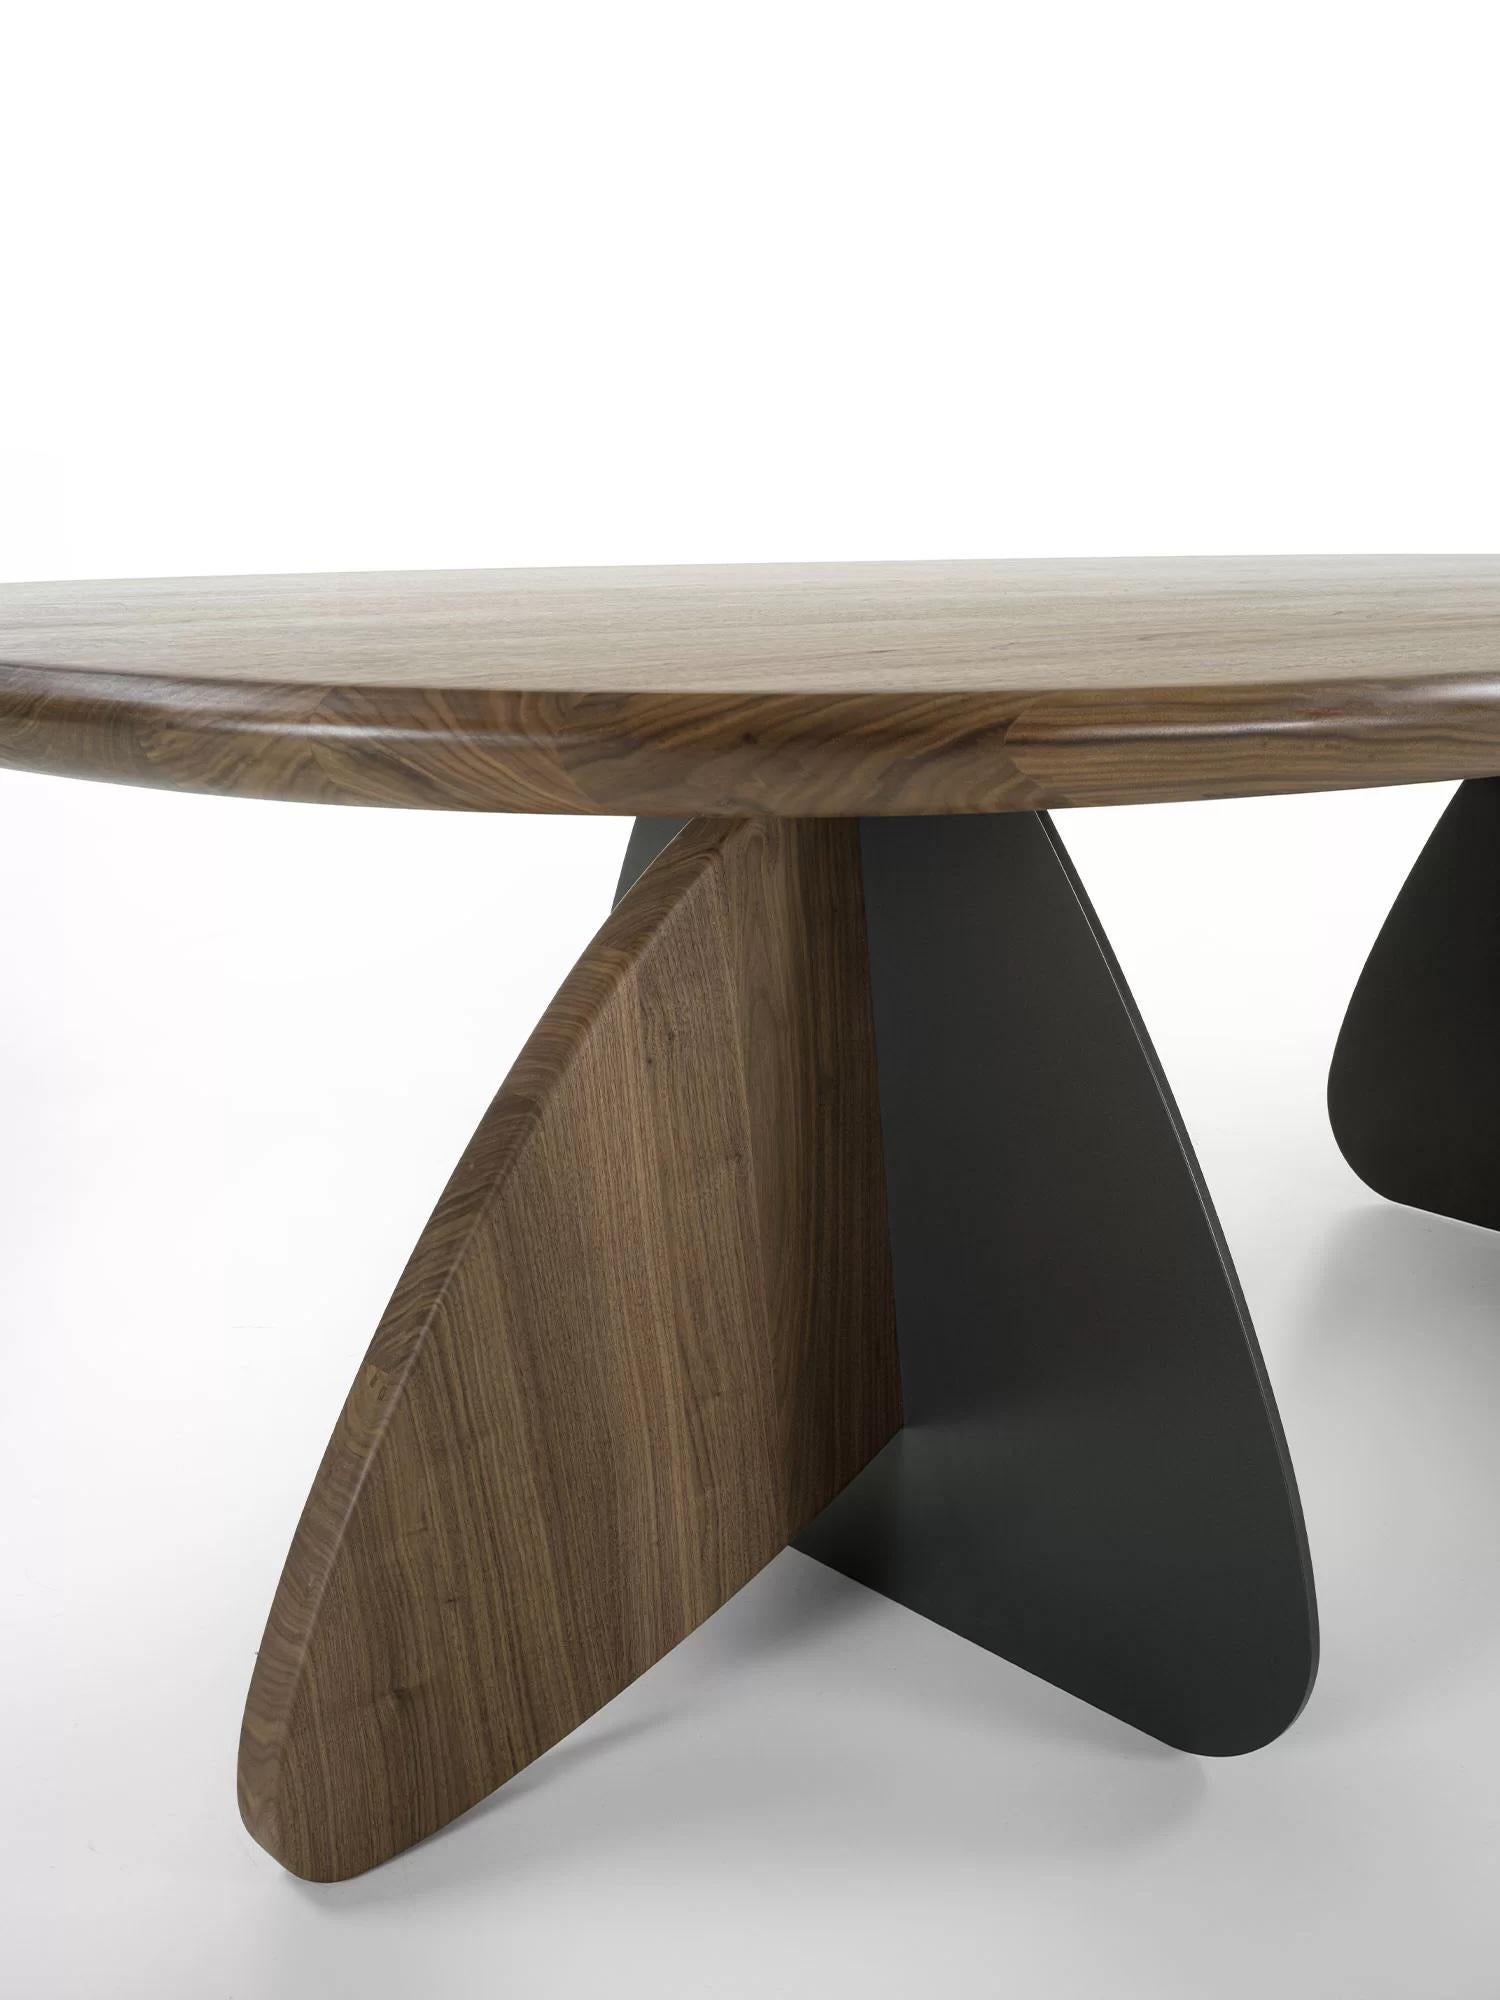 Cross Solid Wood & Iron Dining Table, Designed by Carlesi Tonelli, Made in Italy For Sale 1